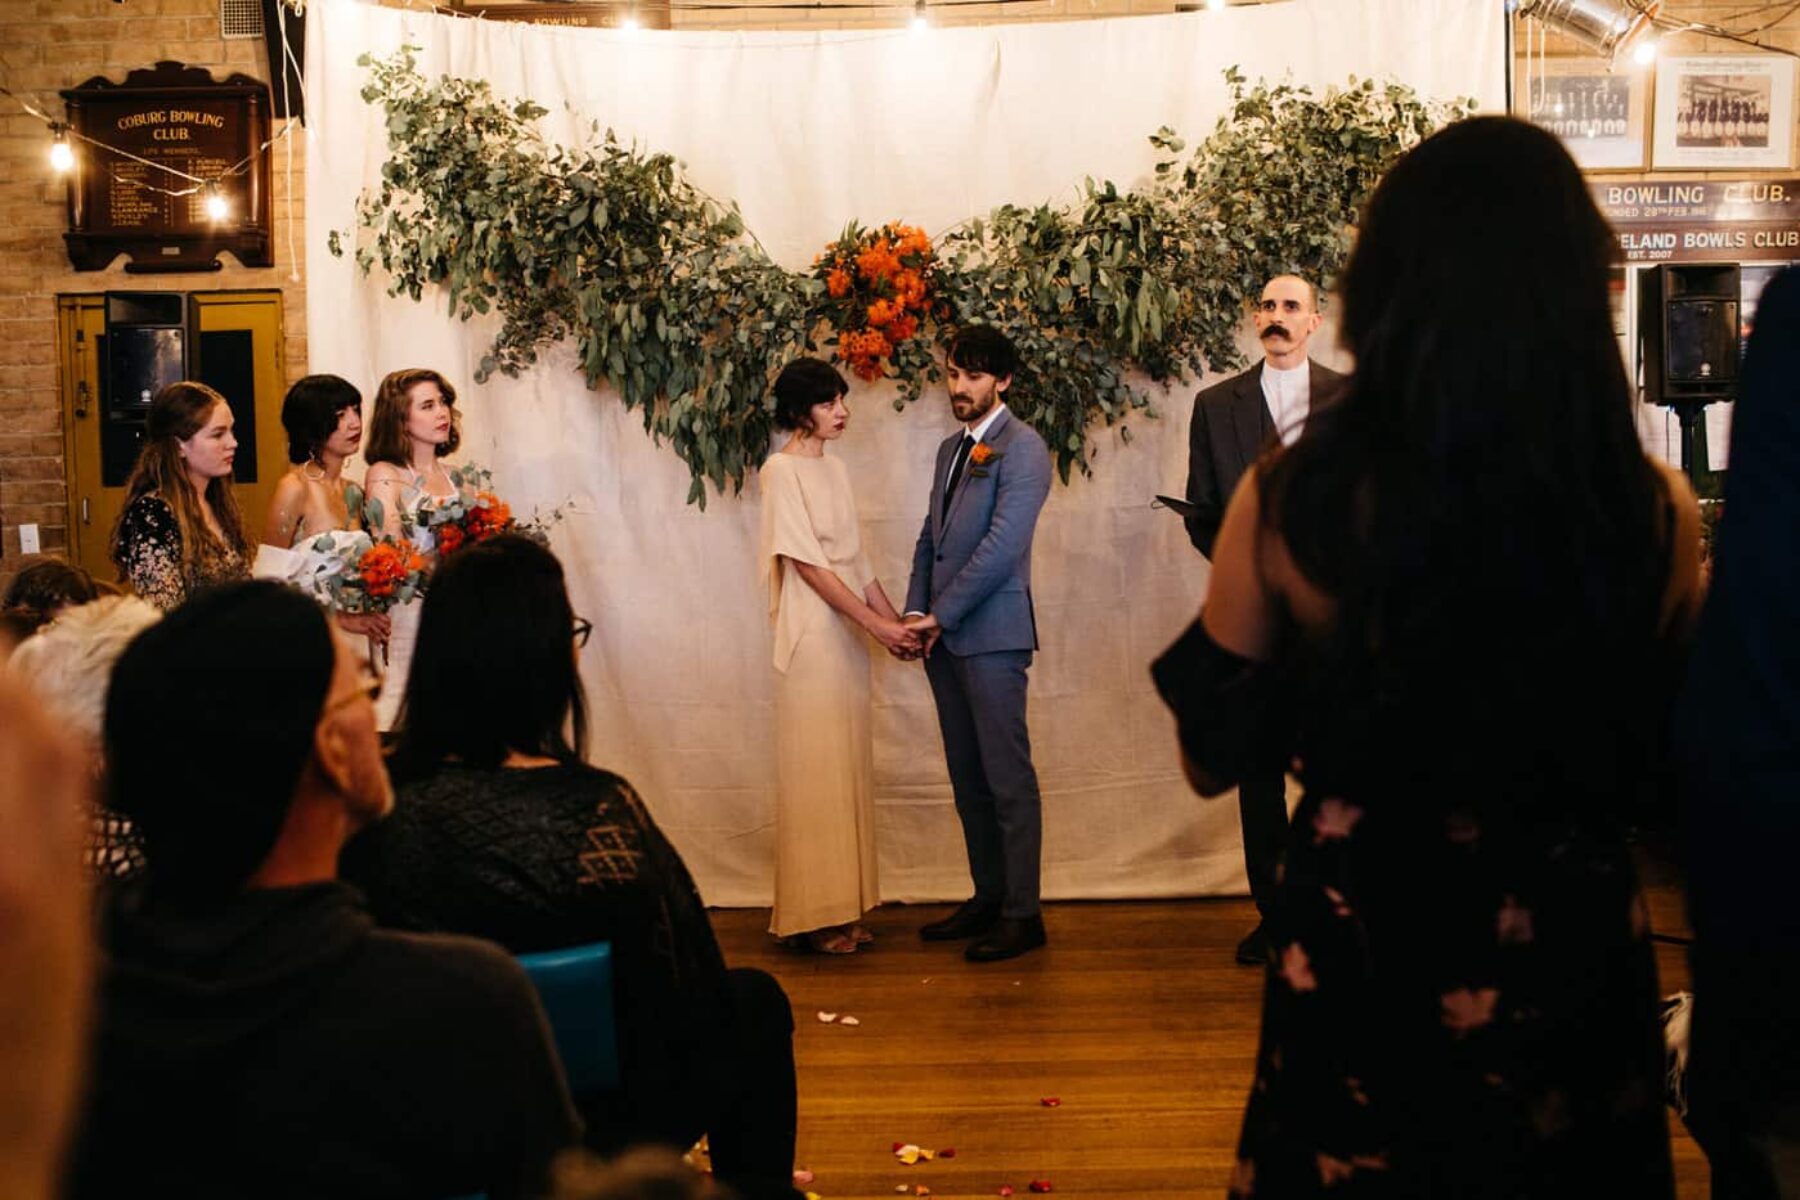 DIY wedding backdrop with native foliage and flowering gum